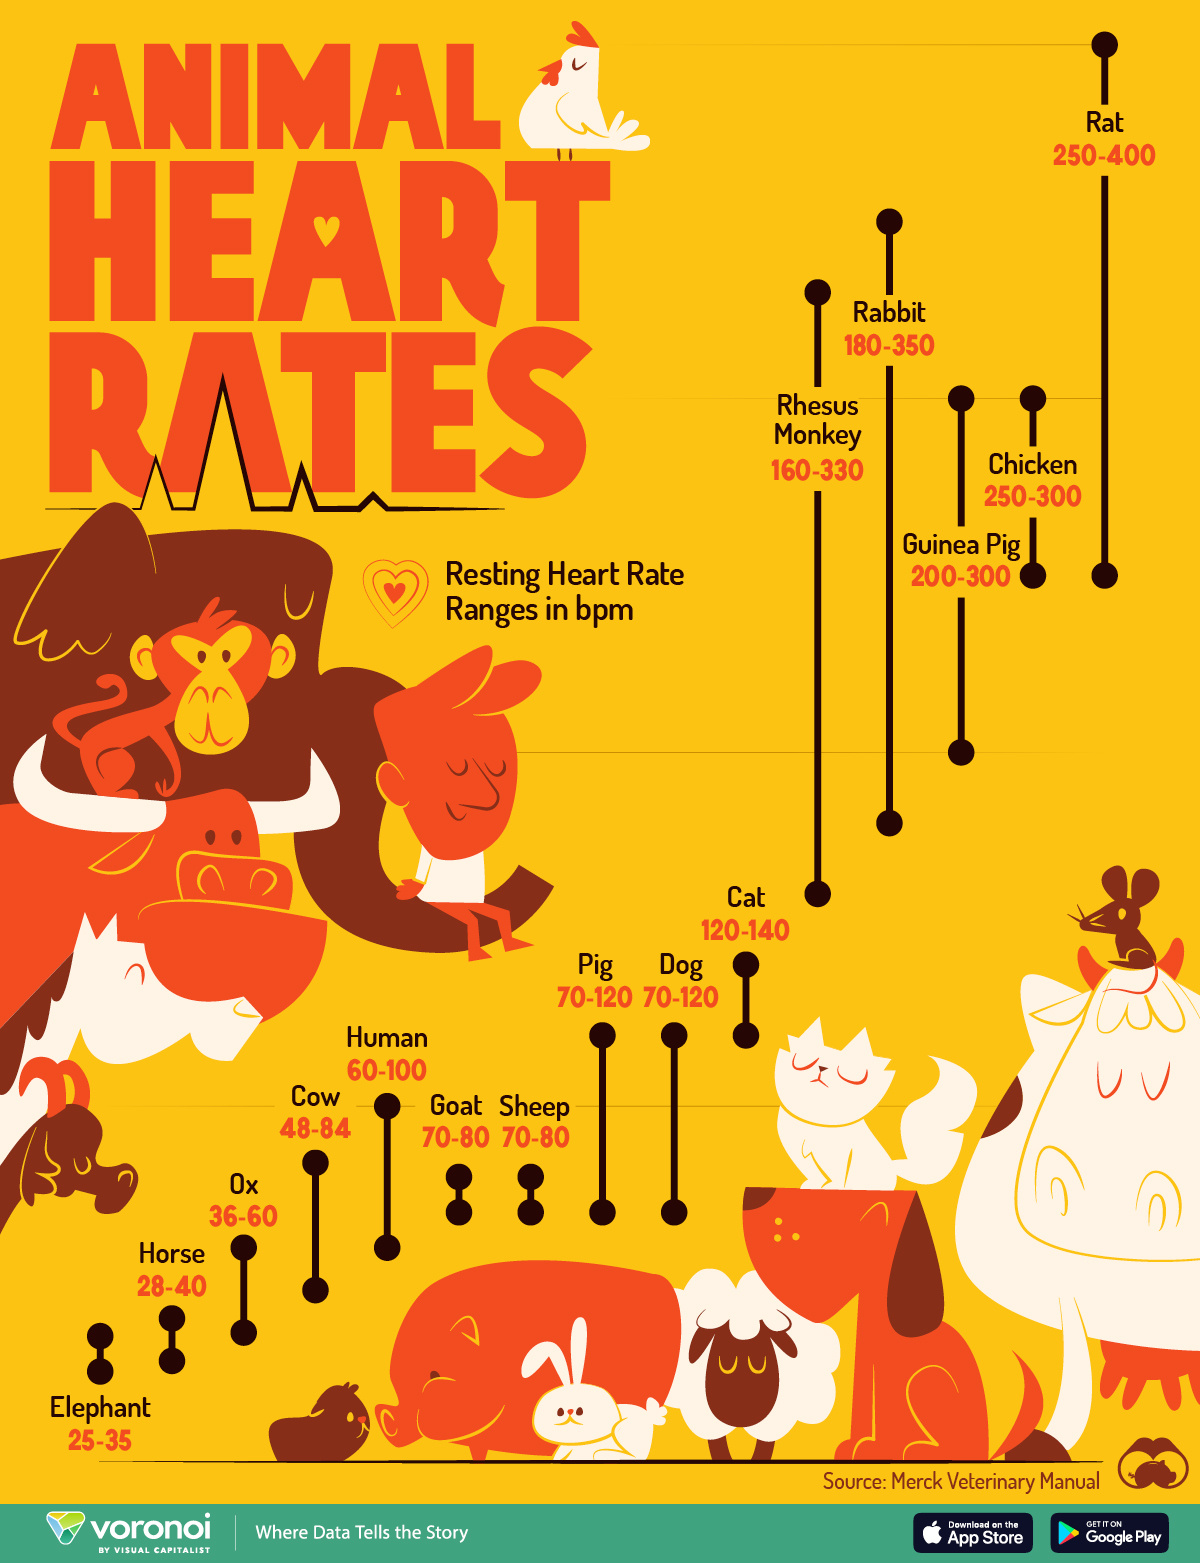 An infographic showing the resting heart rate ranges for 15 different animals